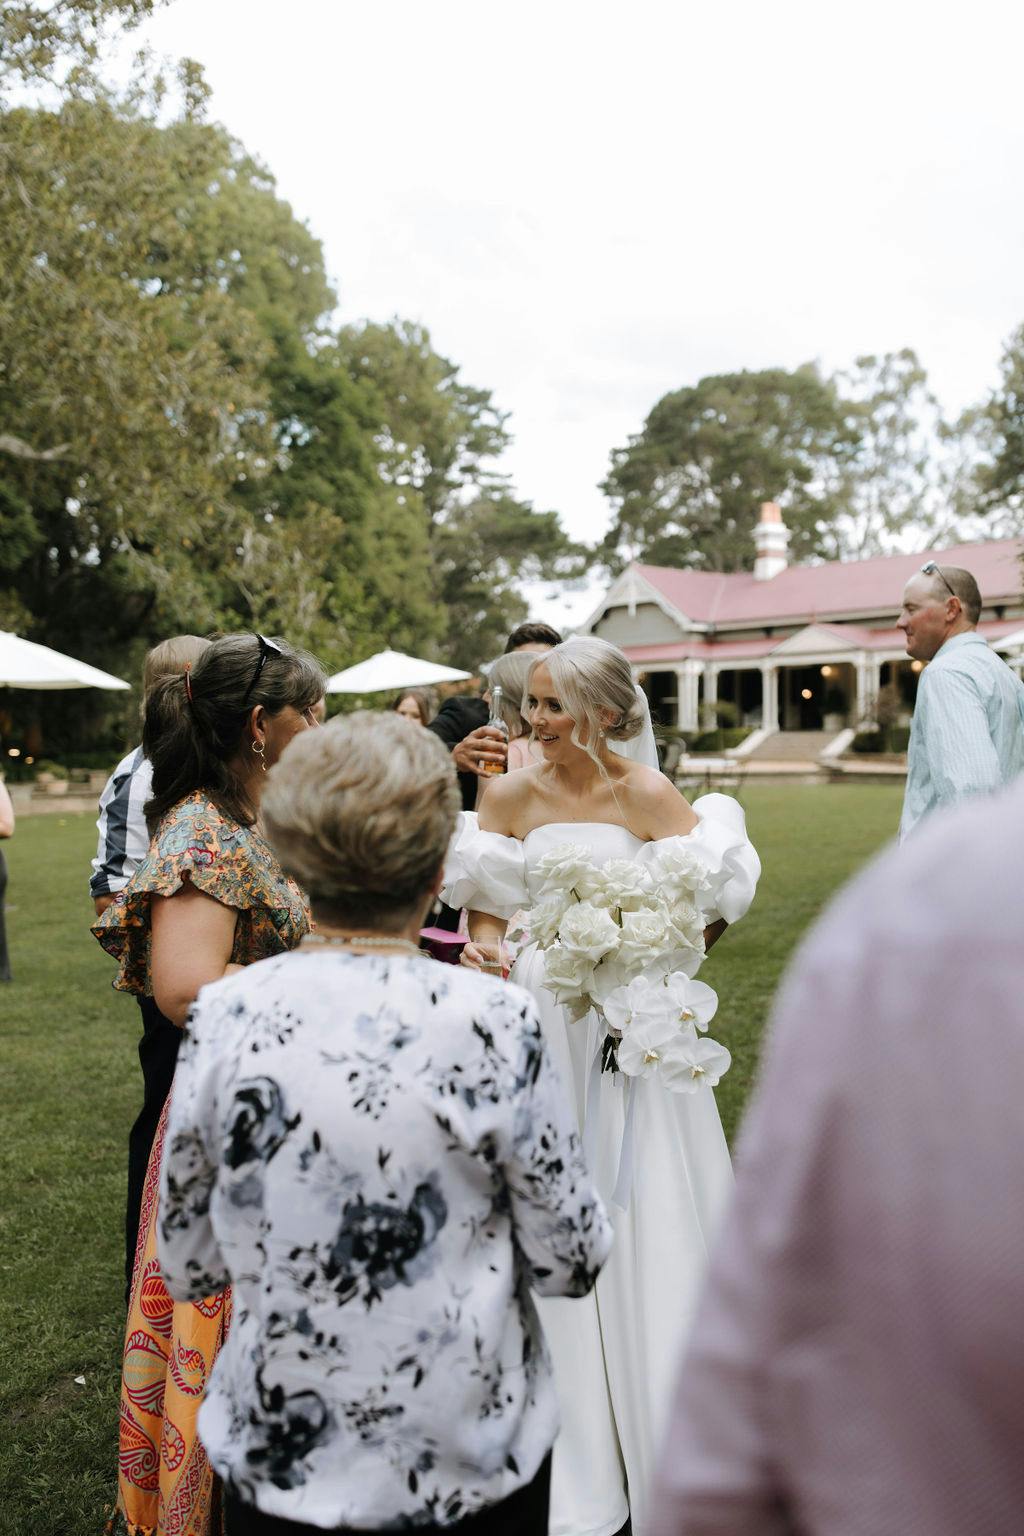 A bride in a white off-the-shoulder gown, holding a bouquet of white flowers, stands outdoors surrounded by guests. Green lawns and trees are visible, along with a building with a red roof in the background. The setting appears to be a garden or park.